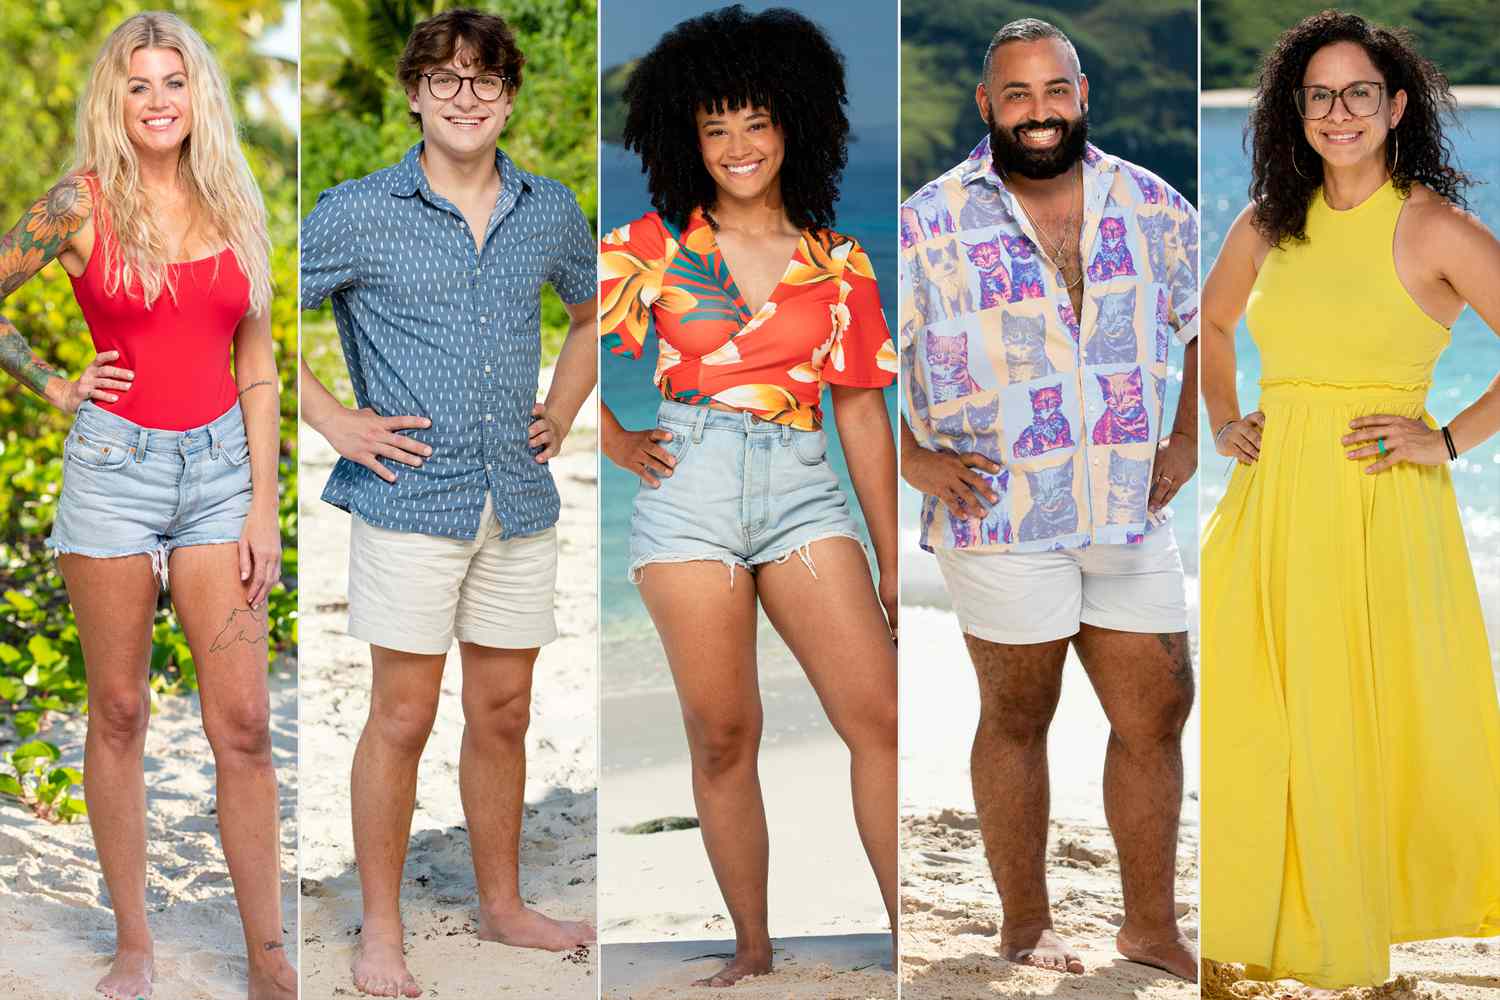 And the 'Survivor 44' winner is…